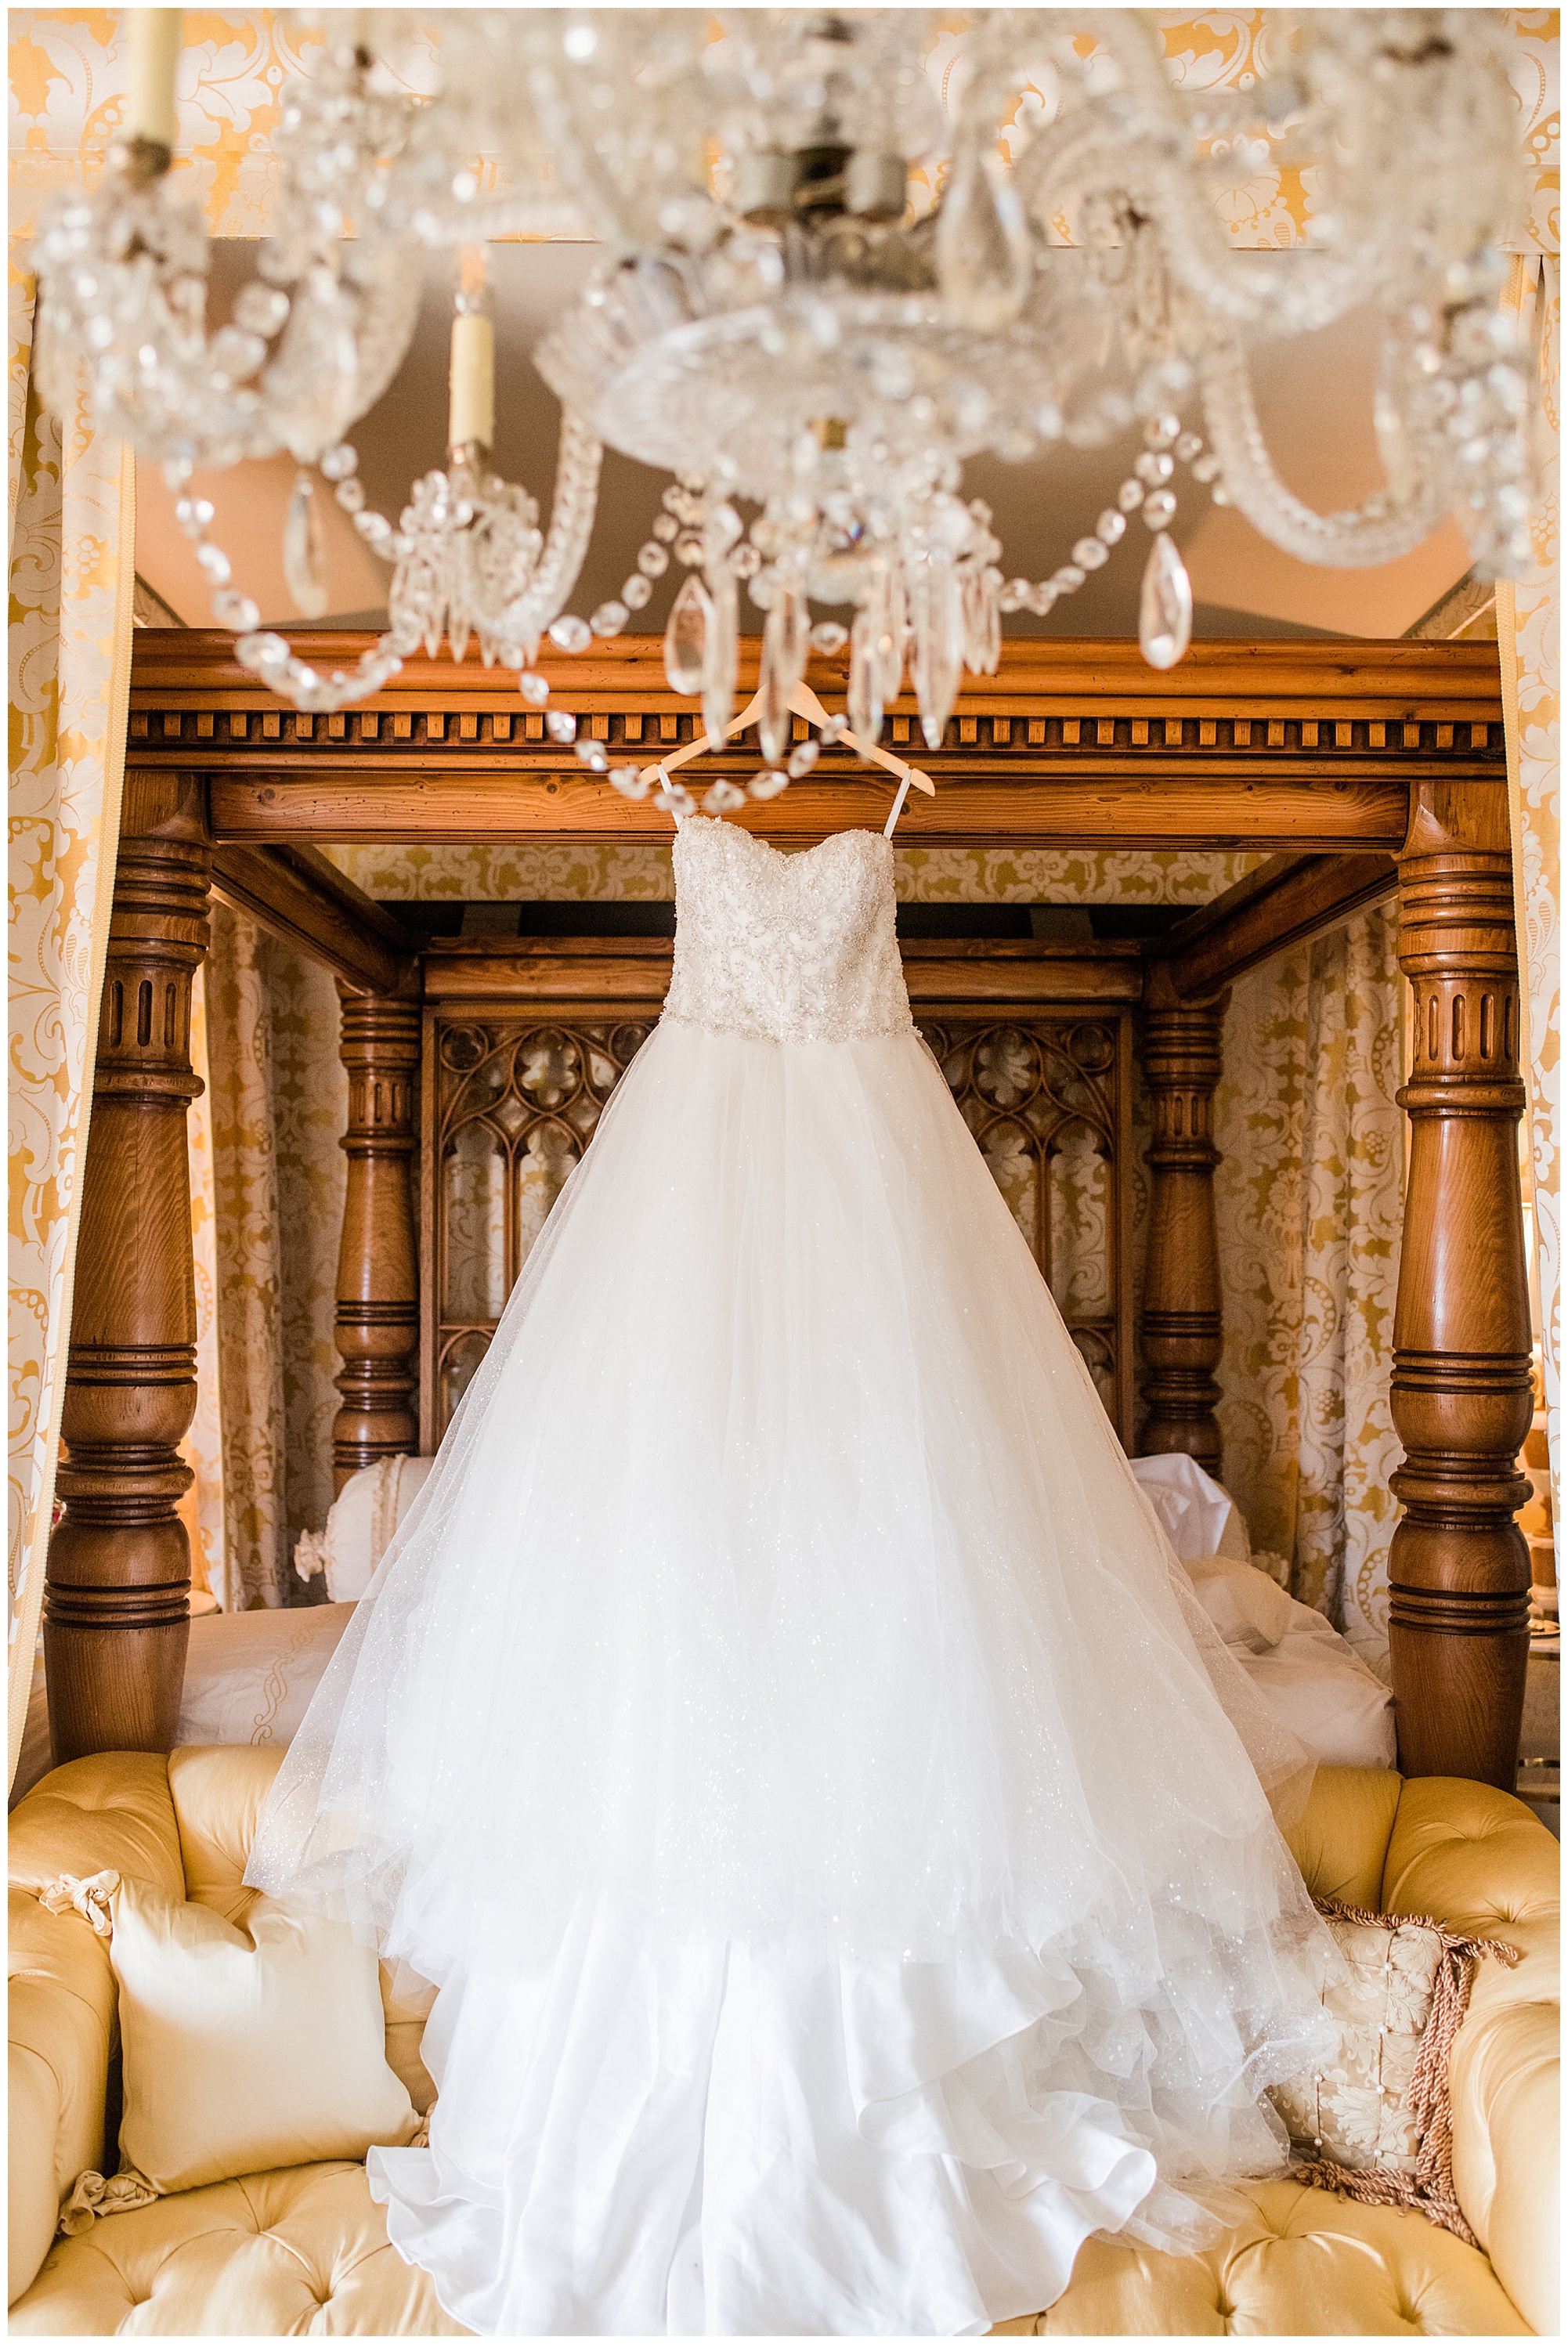 wedding dress in bridal suite at dover hall in rva virginia richmond in september fall chandelier